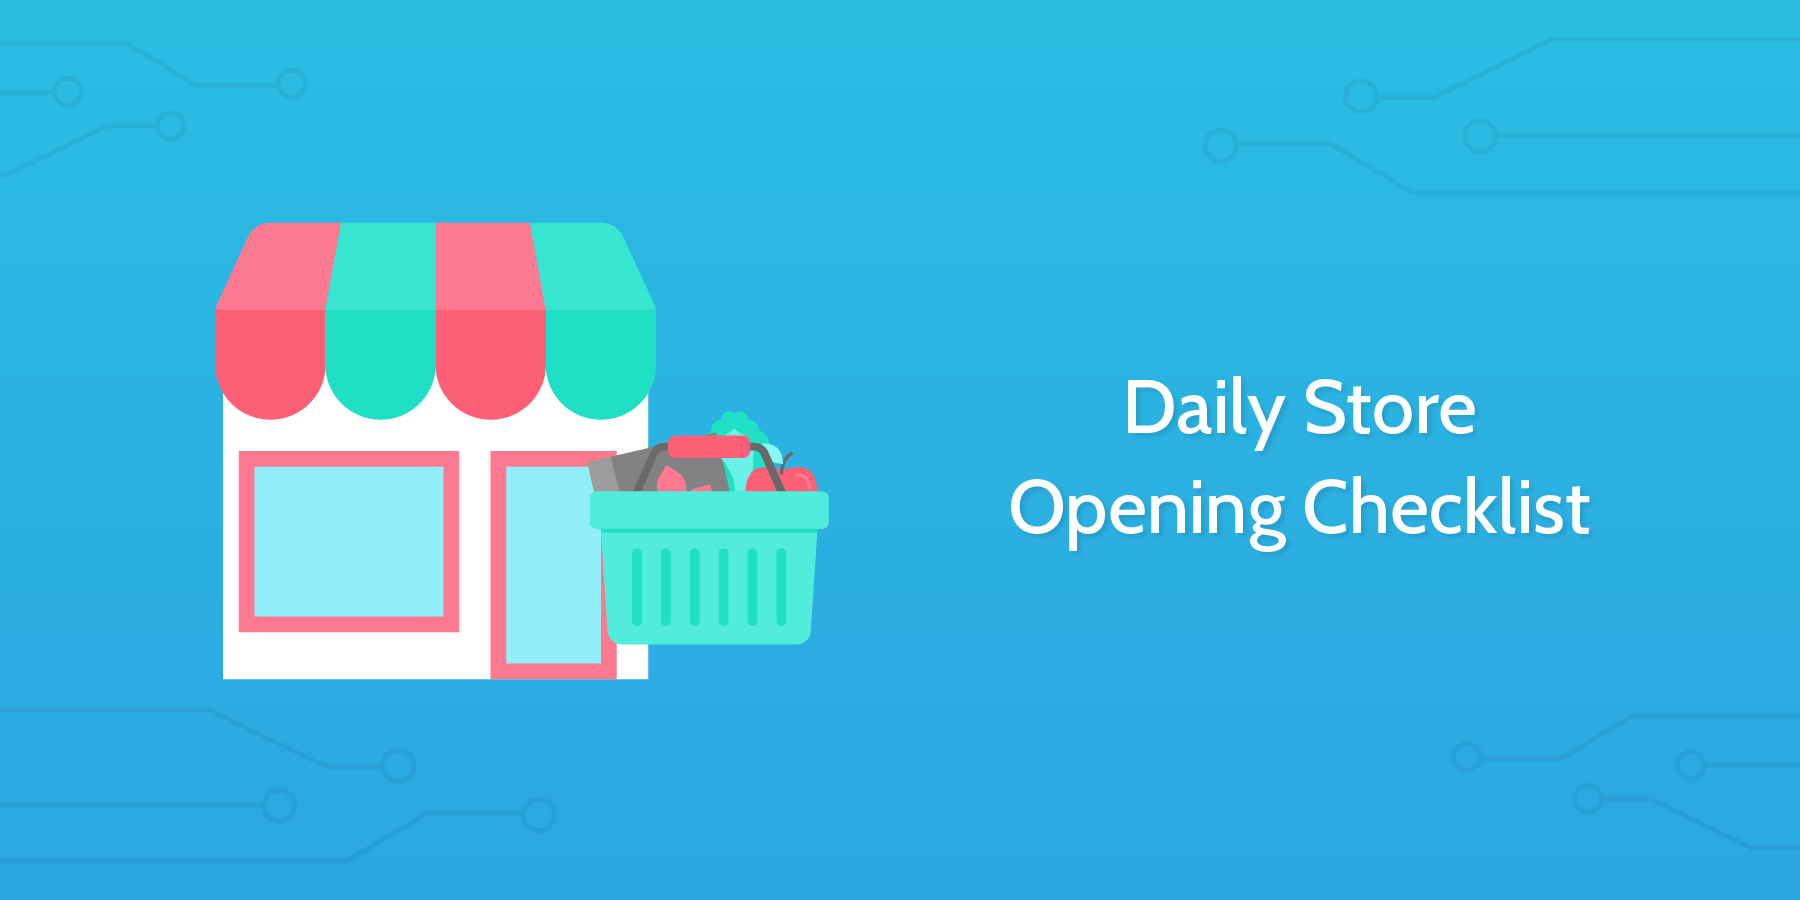 Daily Store Opening Checklist